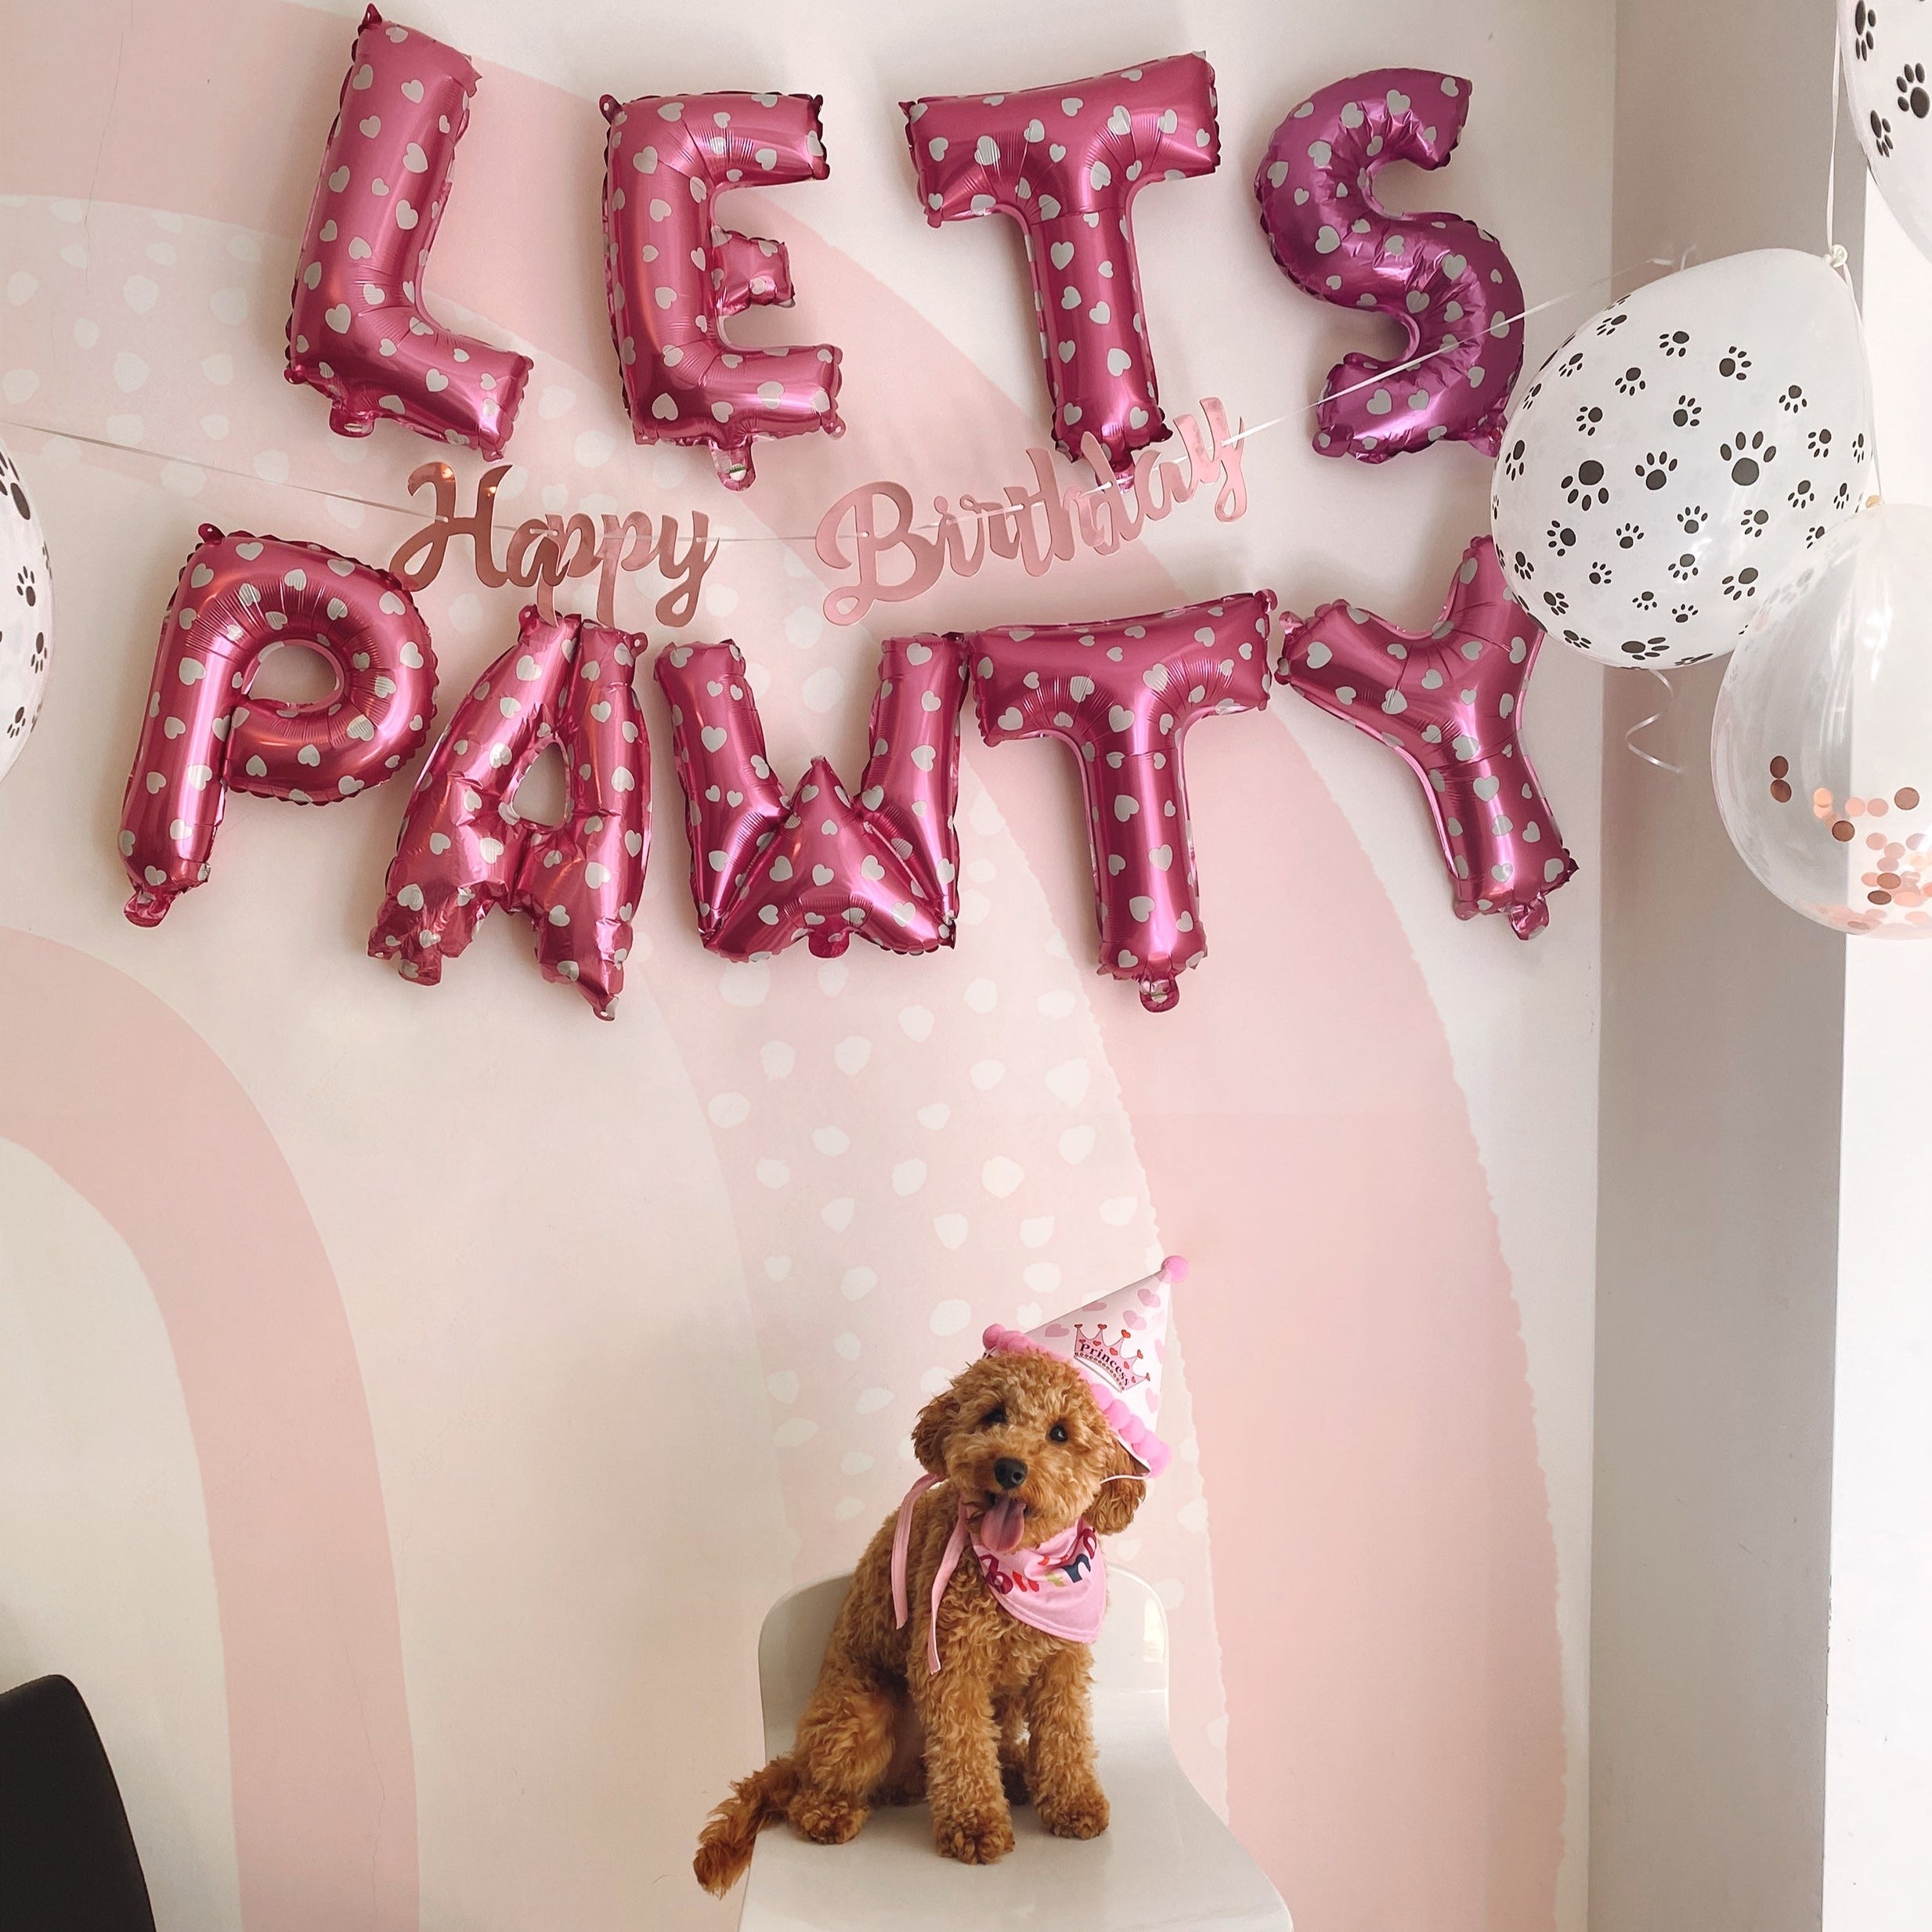 A delightful setting for a pet’s birthday party with the Cute Rainbow Wallpaper Mural - Celeste in the background. The room is decorated with pink balloon letters spelling "LET'S PAWTY" and a happy birthday banner, with a playful puppy wearing a birthday hat, enhancing the joyous atmosphere.